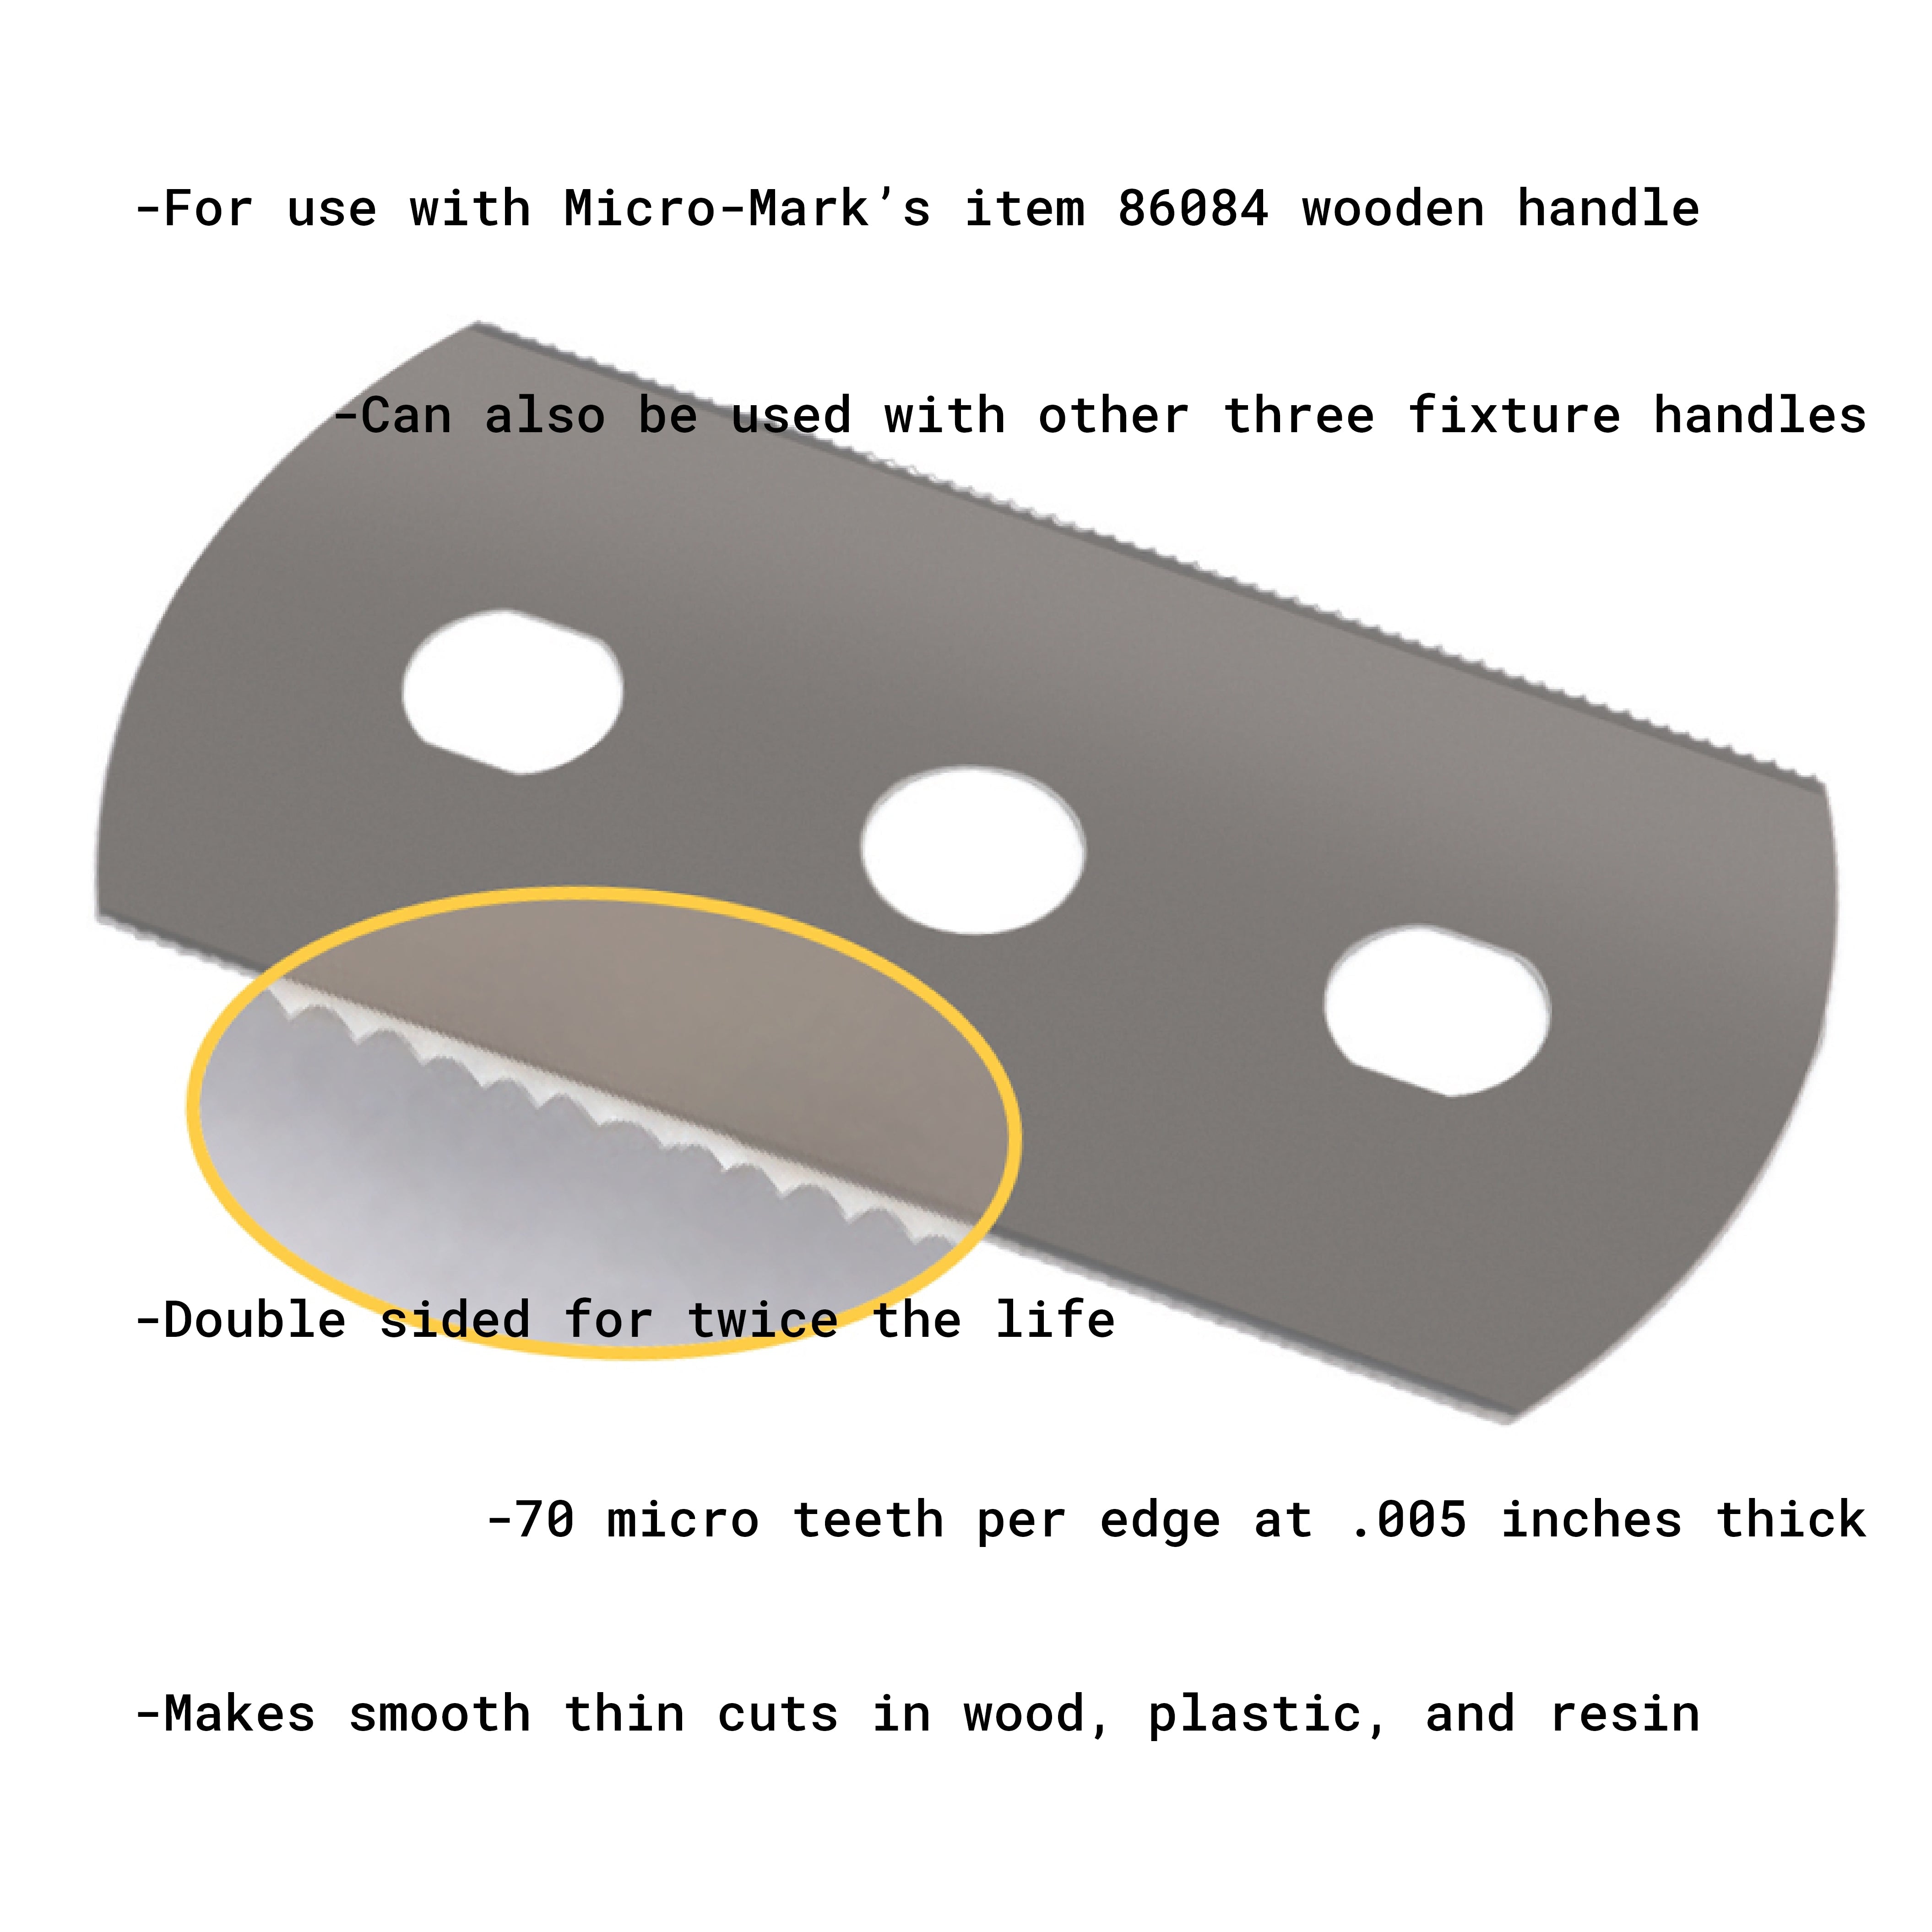 Special Hobby Ultra Smooth Saw Blades - Package of 5